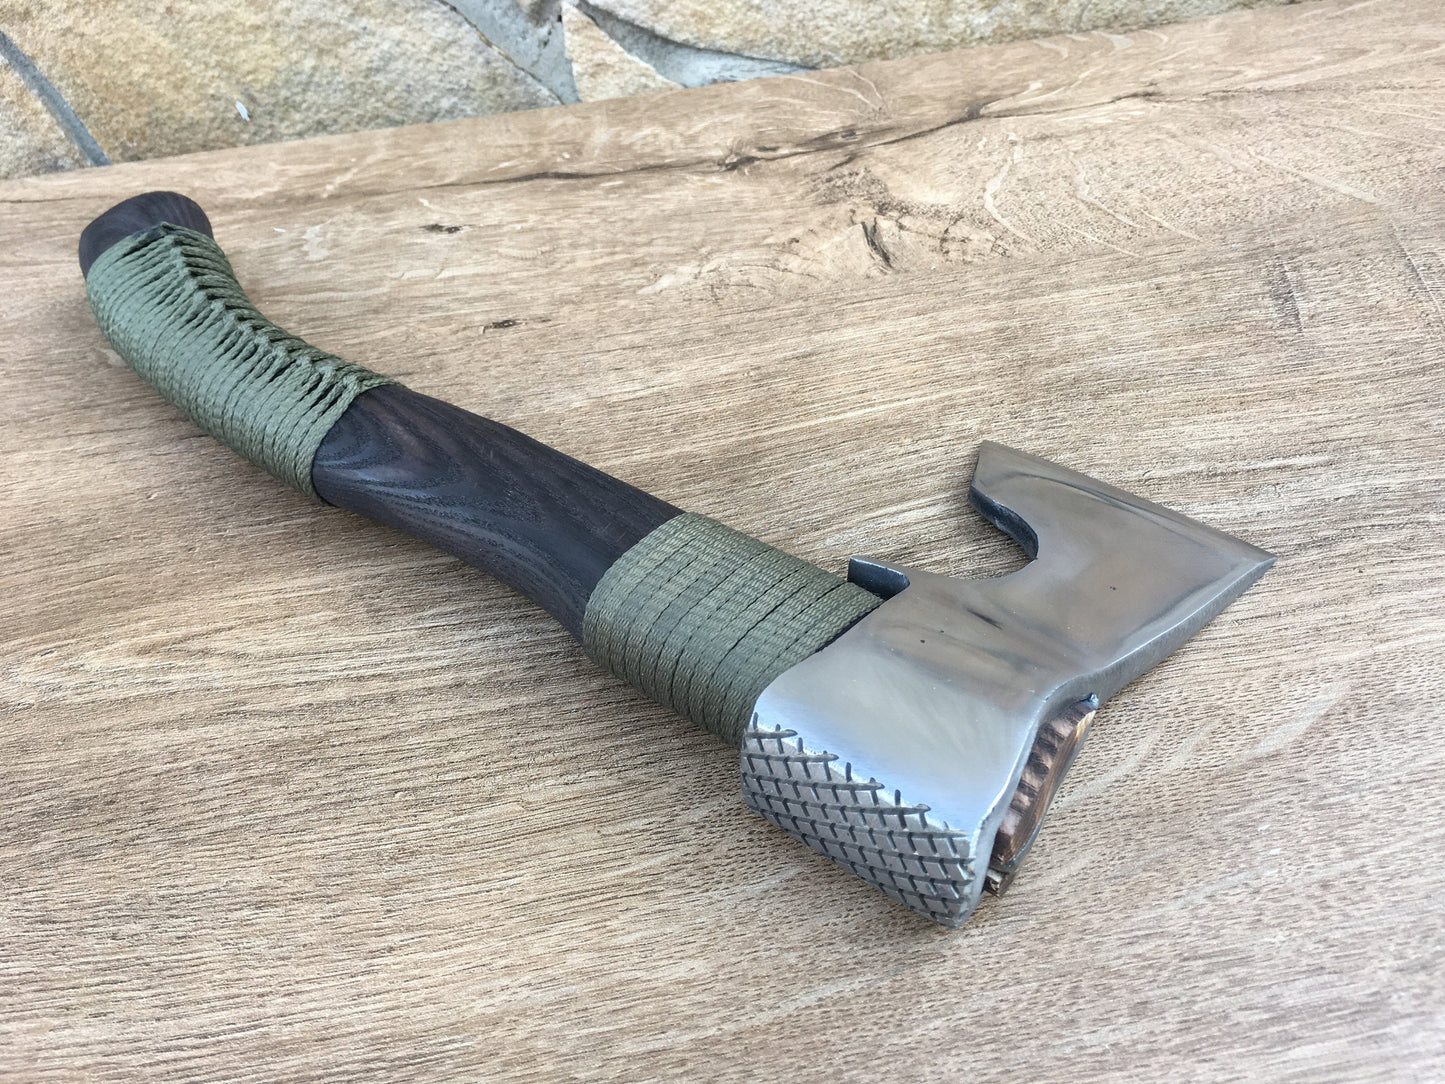 Viking axe, medieval axe, manly gifts, tomahawk, hatchet, viking hatchet, engraved axe, husband gift, custom axe, dad gifts, mens gifts, ax